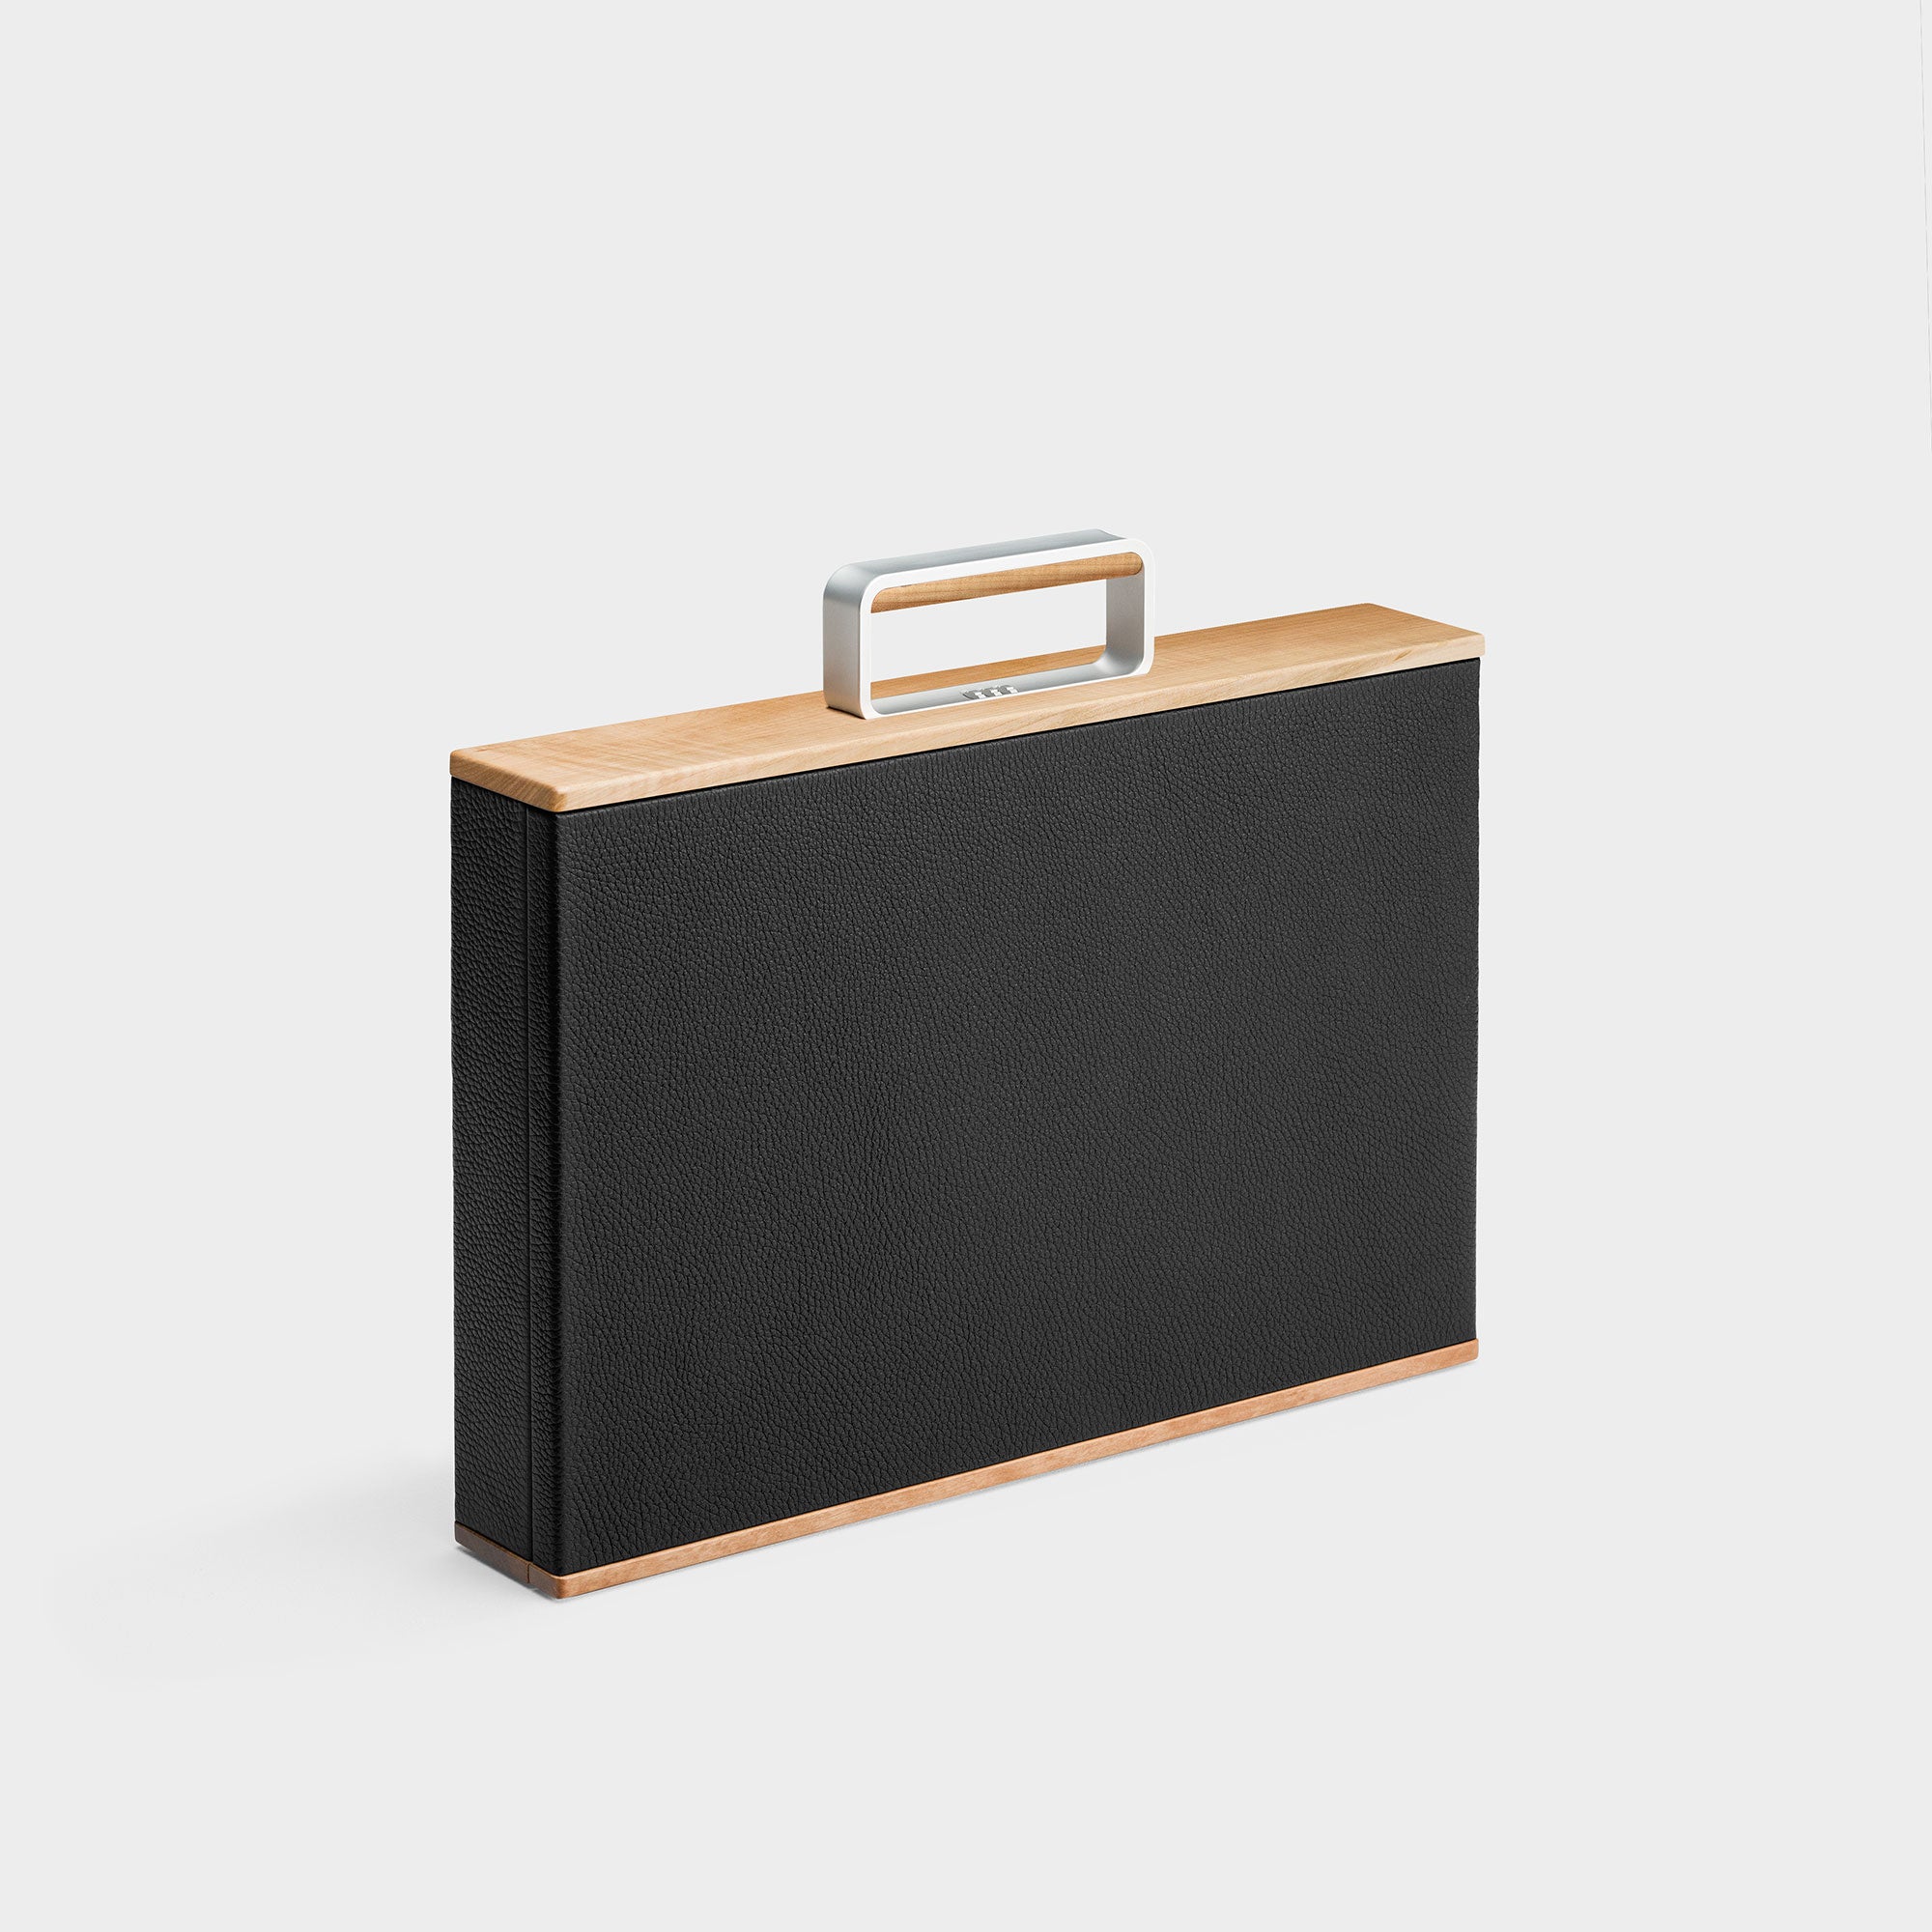 Charles Simon Mackenzie Original watch briefcase in black leather and maple wood accents made from sustainable recycled wood front view